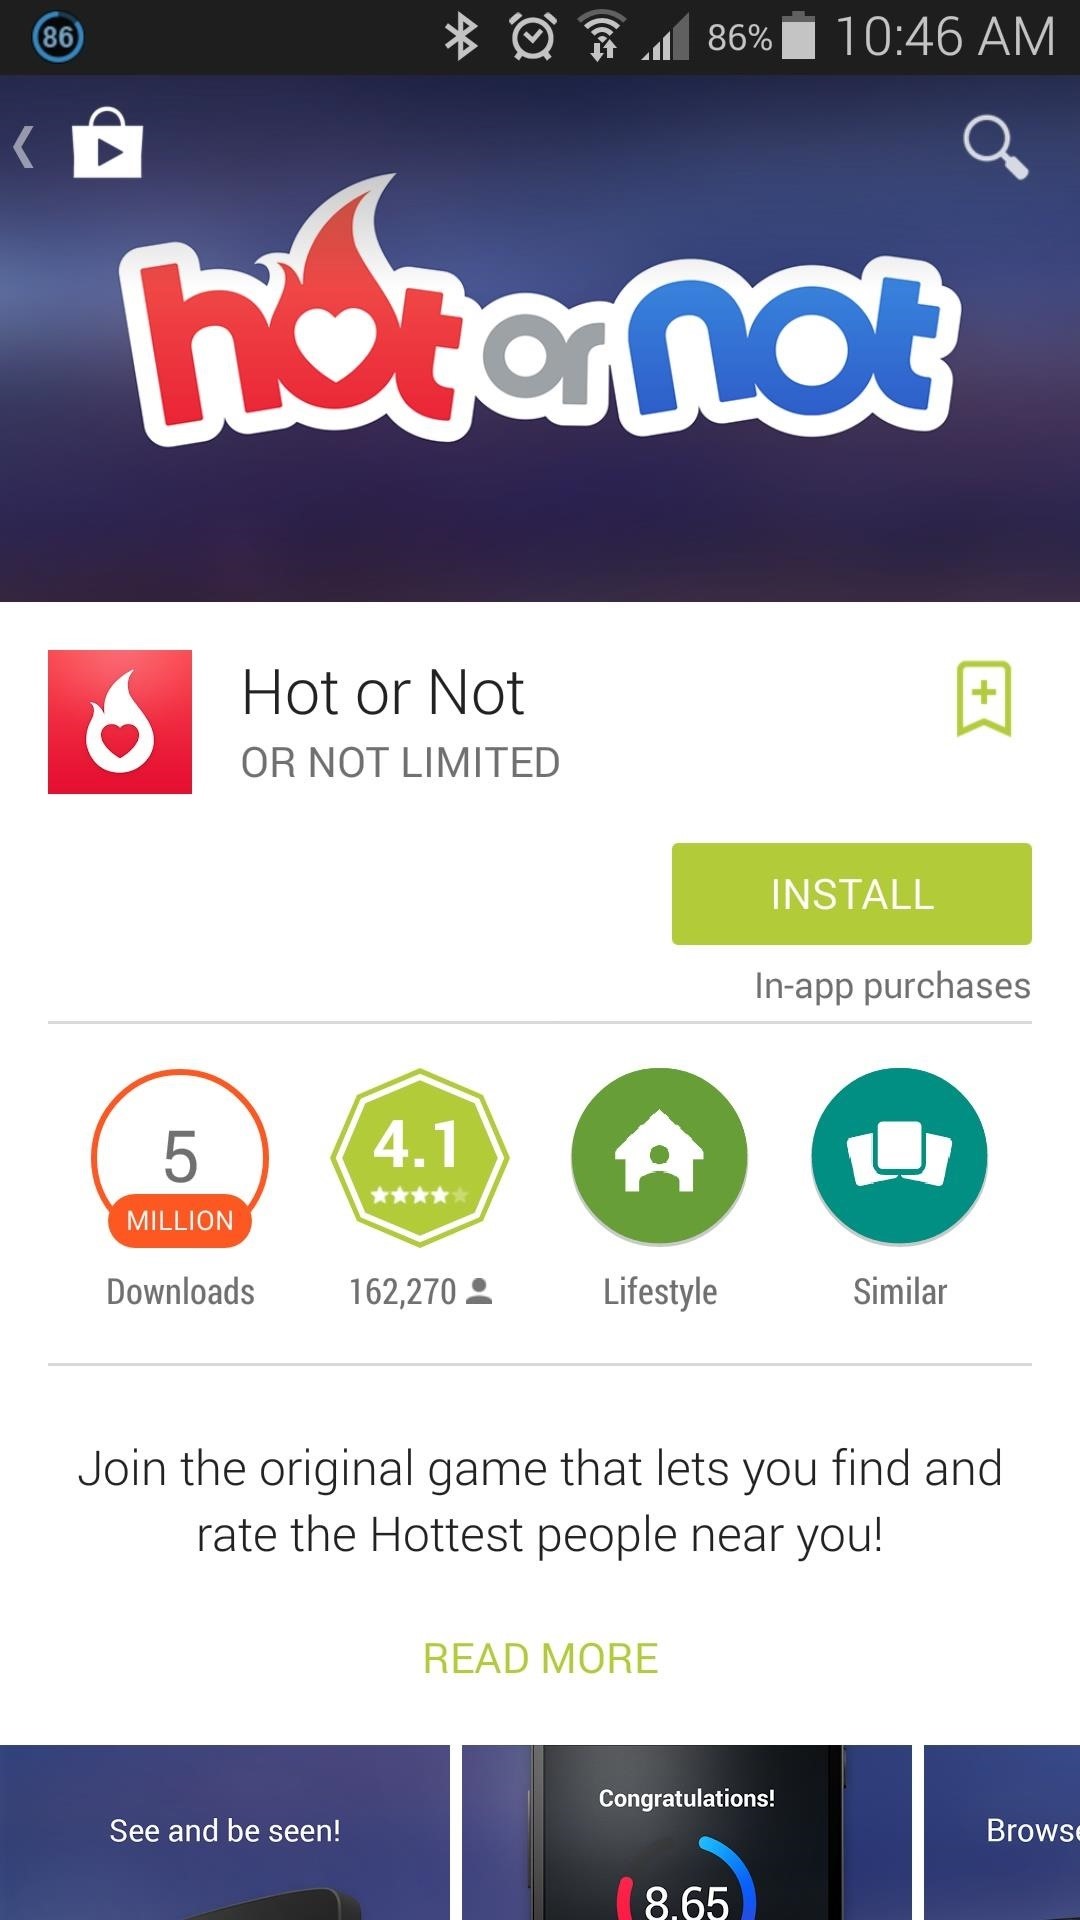 Hot or Not: The Original Ego Scaler Is Now on Android, iOS, & Windows